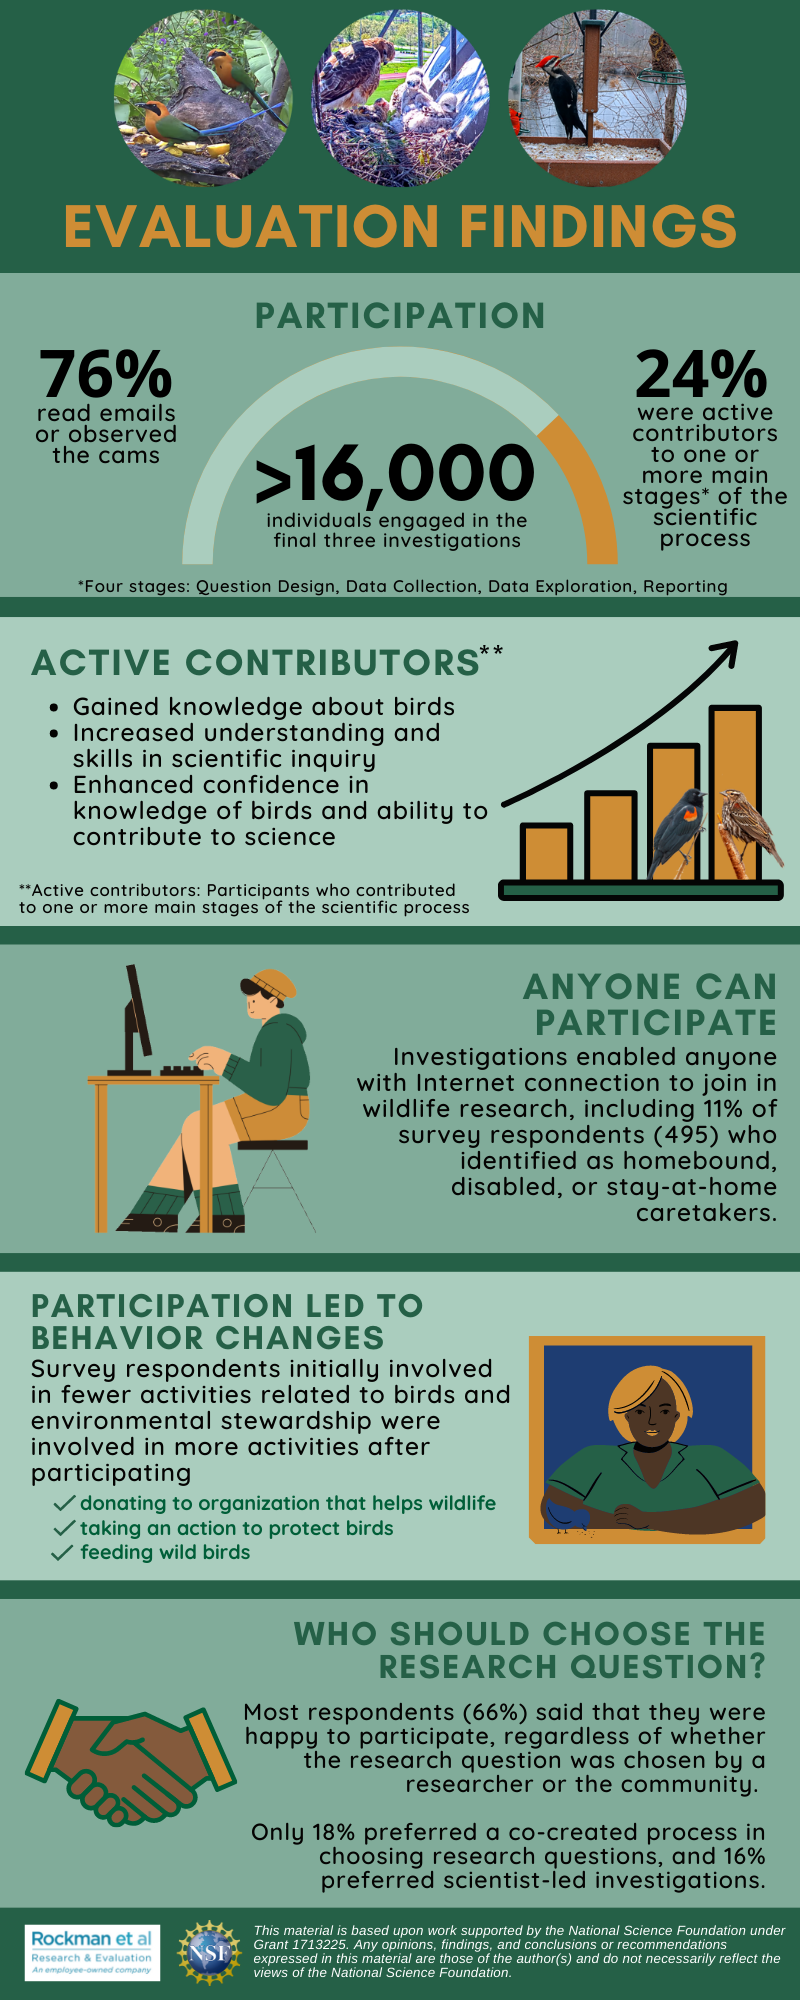 An infographic that highlights Evaluation findings. There is a visual showing that there were more than 16,000 individuals engaged in the final three investigations. Of those, 76% read emails or observed the cams. 24% were active contributors to one or more main stages of the scientific process. This includes four stages: Question Design, Data collection, Data Exploration, Reporting. Active contributors gained knowledge about birds, increased understanding and skill in scientific inquiry, and enhanced confidence in knowledge of birds and ability to contribute to science. No such gains for those who read emails. Anyone can participate. Investigations enabled anyone with Internet connection to join in wildlife research, including 11% of survey respondents (495) who identified as homebound, disabled, or stay-at-home caretakers. Participation led to behavior changes. Survey respondents initially engaged in fewer activities related to birds and environmental stewardship were involved in more activities after participating: donating to organization that helps wildlife, taking actino to protect birds, and feeding wild birds. Most participant don't prefer co-creation. Most respondents (66%) said they were happy to participate, regardless of whether the research question was chosen by a resaercher or the community. Only 18% perferred a co-created process in choosing research questions, and 16% preferred scientist-led investigations. AT the bottom fo the infographic is the Rockman et al. logo and the National Science Foundation logo with language that refers to how the material is supported by Grant #1713225 and findings are those of authors and not the National Science Foundation.